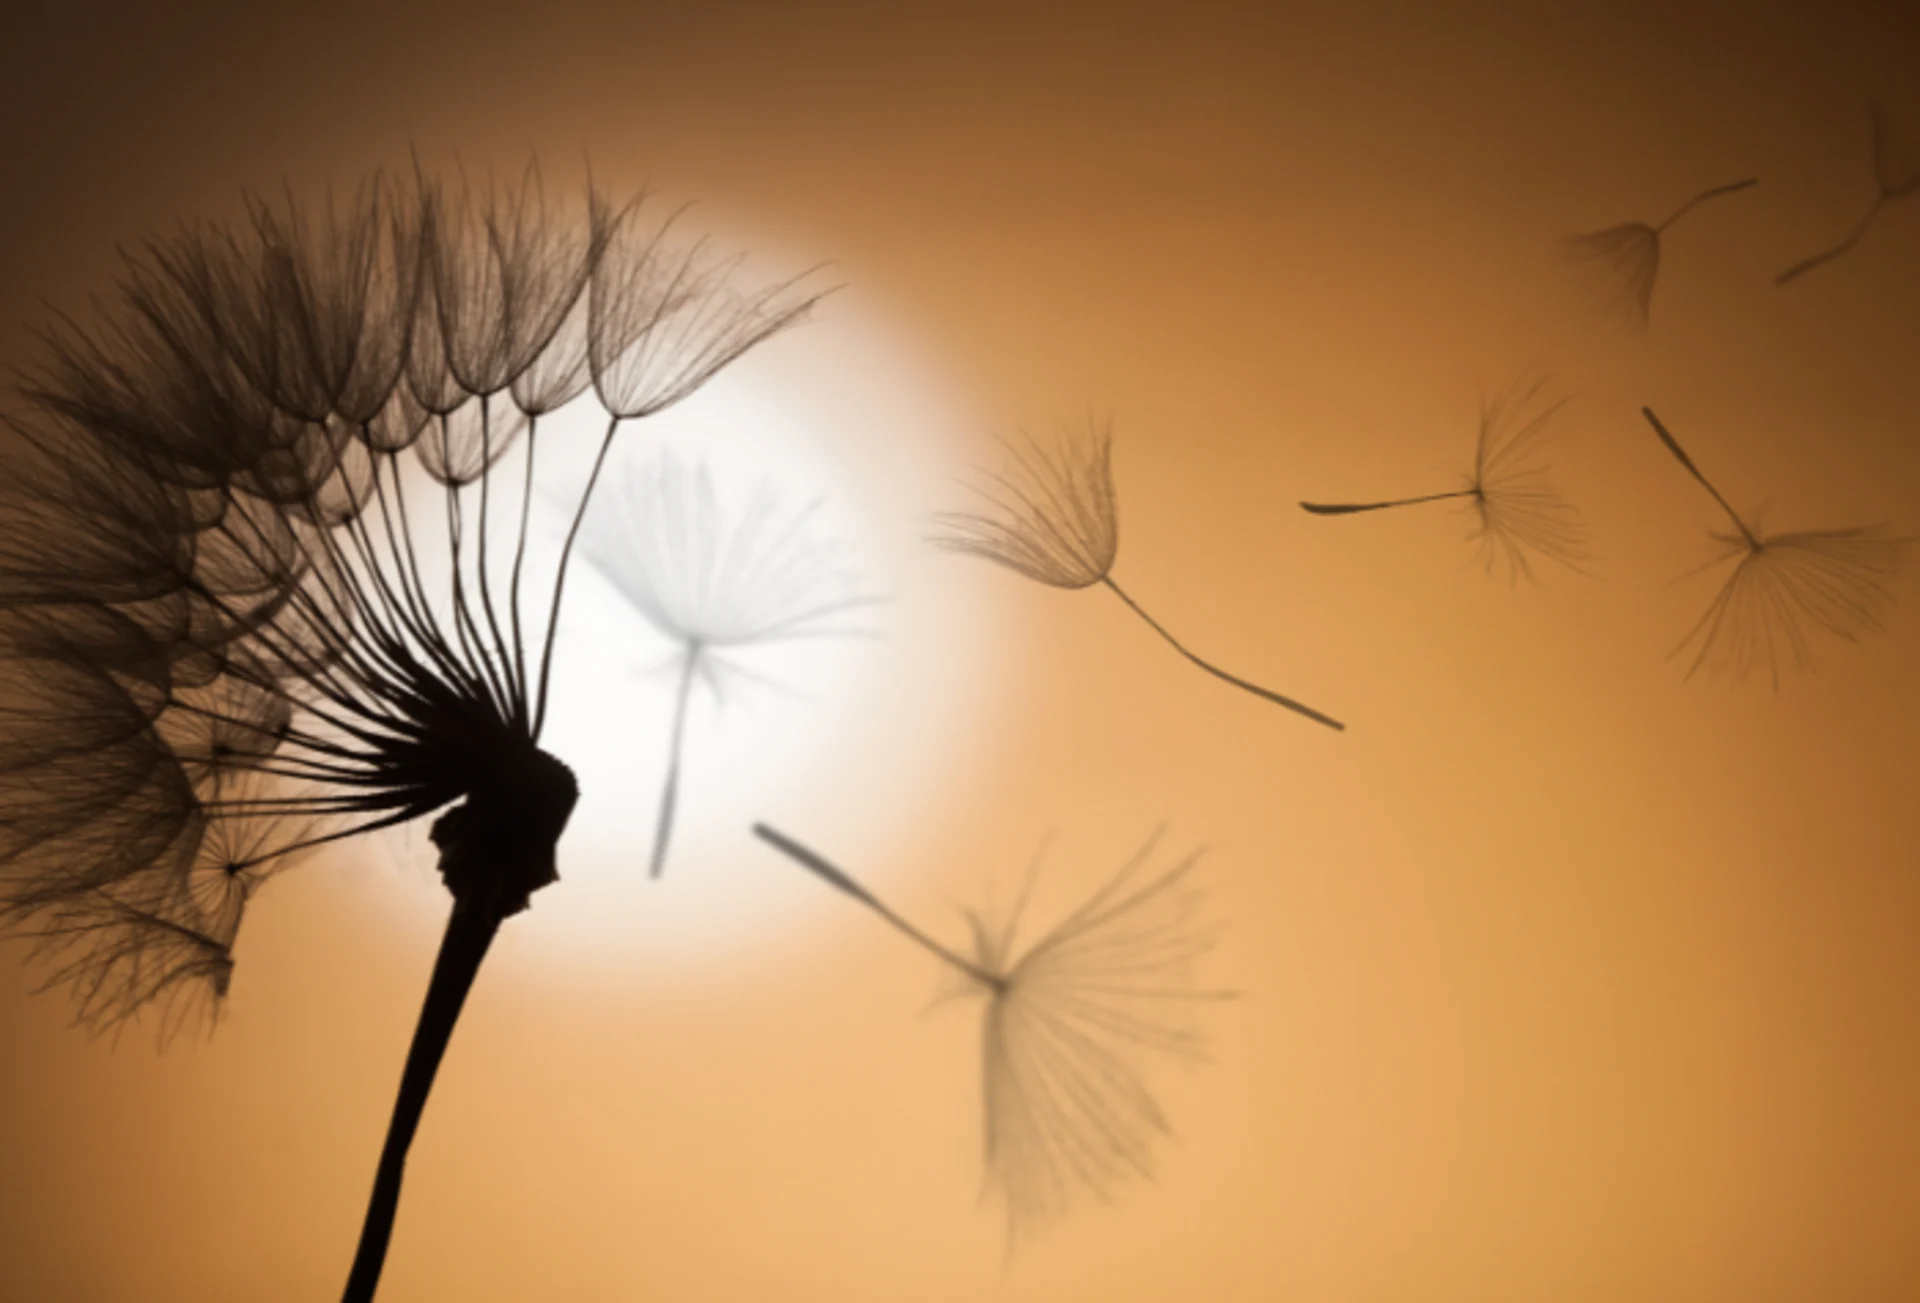 Dandelion seeds fly up to 100 km because they take cues from the weather